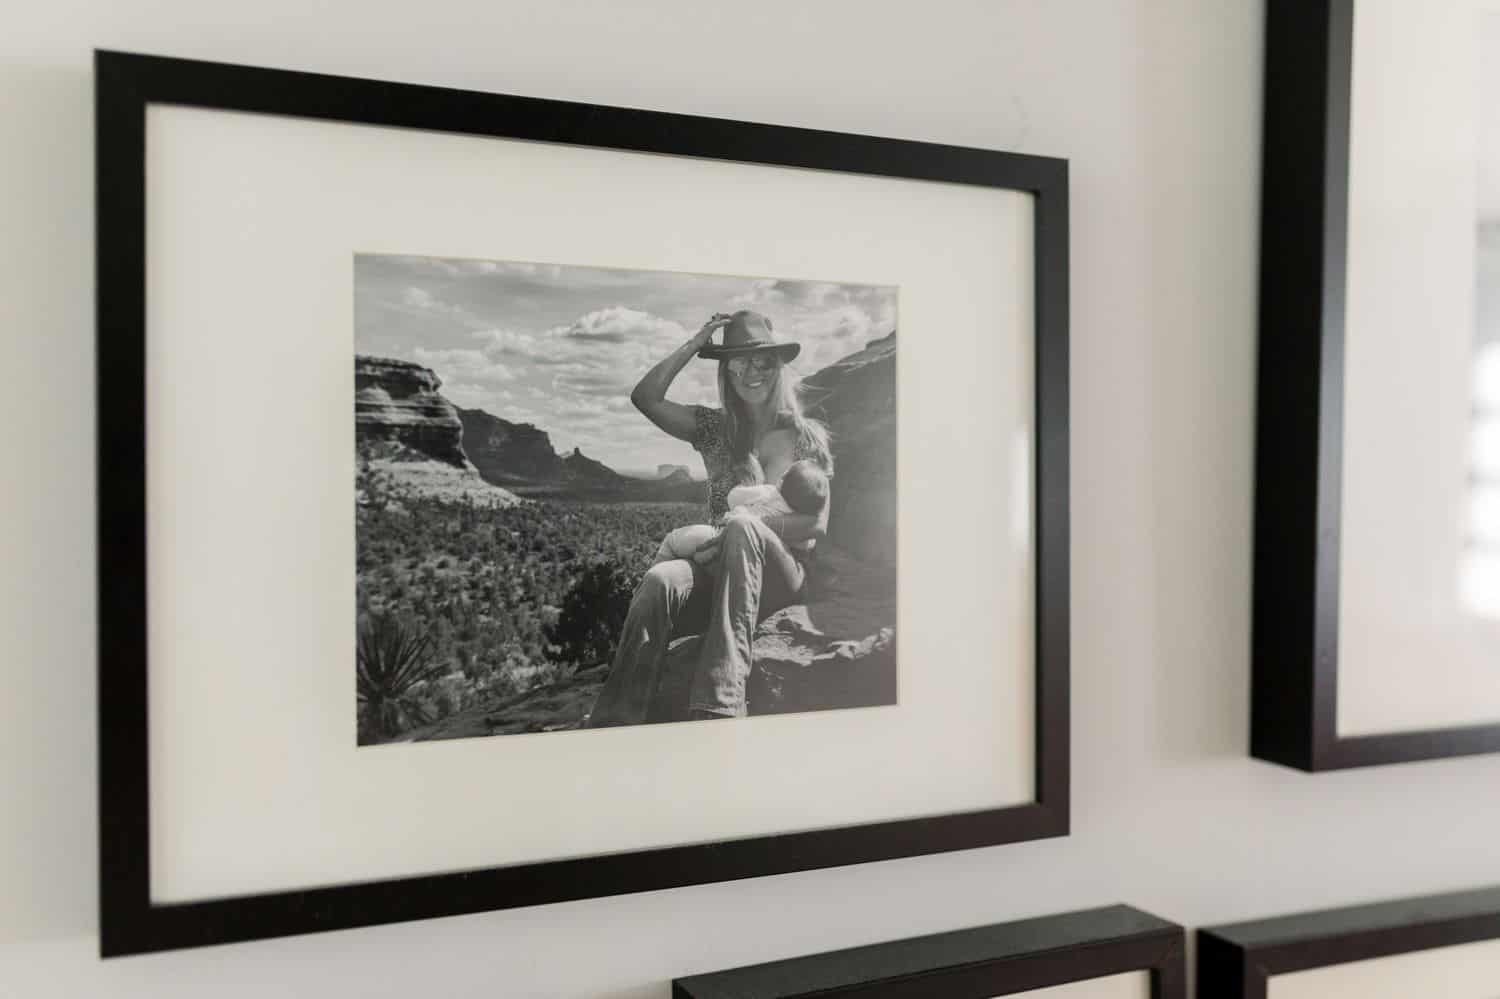 A black and white portrait of a woman in a cowboy hat is framed and hanging on a white wall